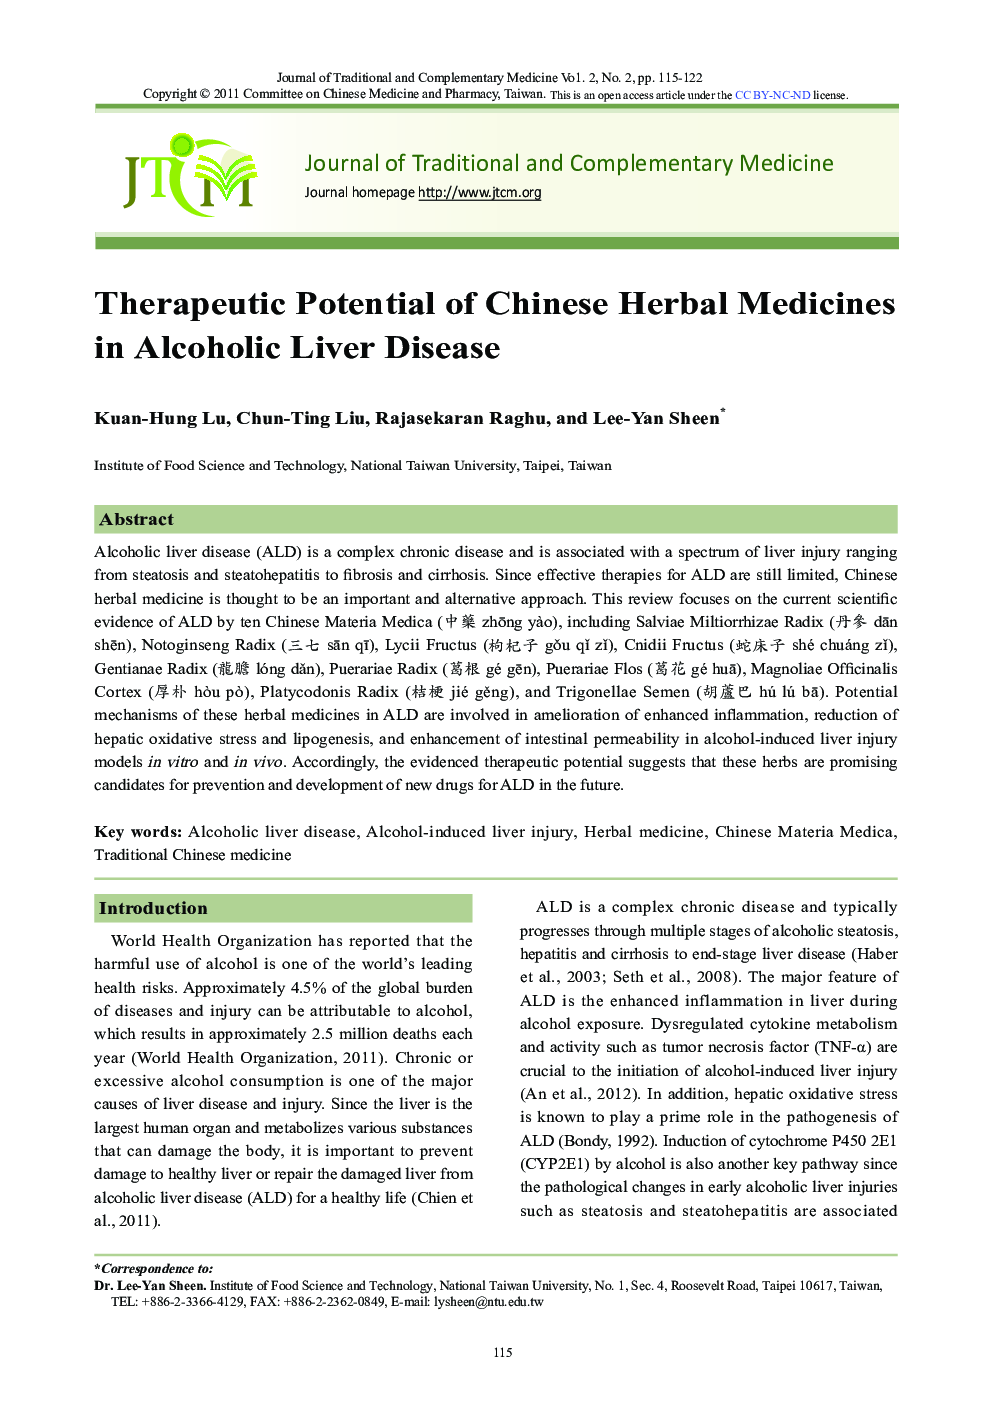 Therapeutic Potential of Chinese Herbal Medicines in Alcoholic Liver Disease